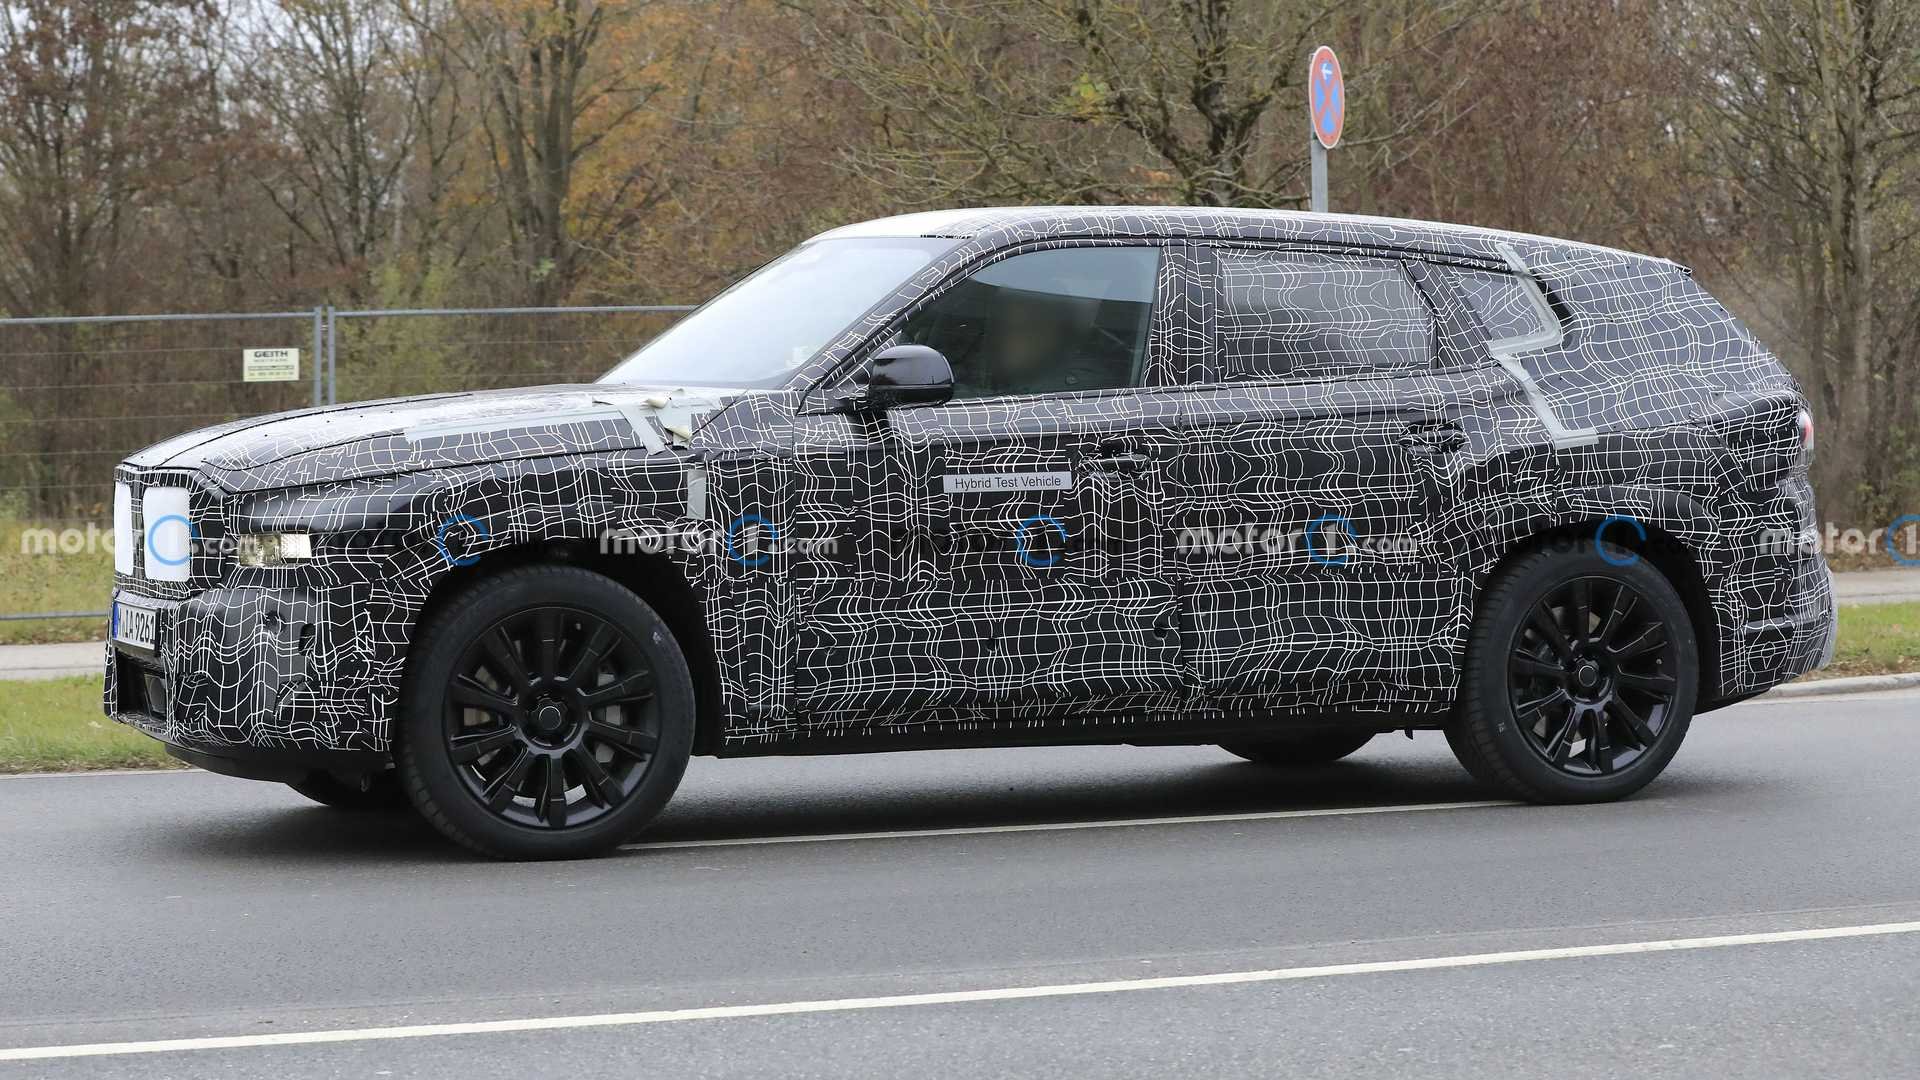 BMW X8 Spied Hiding What Seems To Be An Unconventional Design